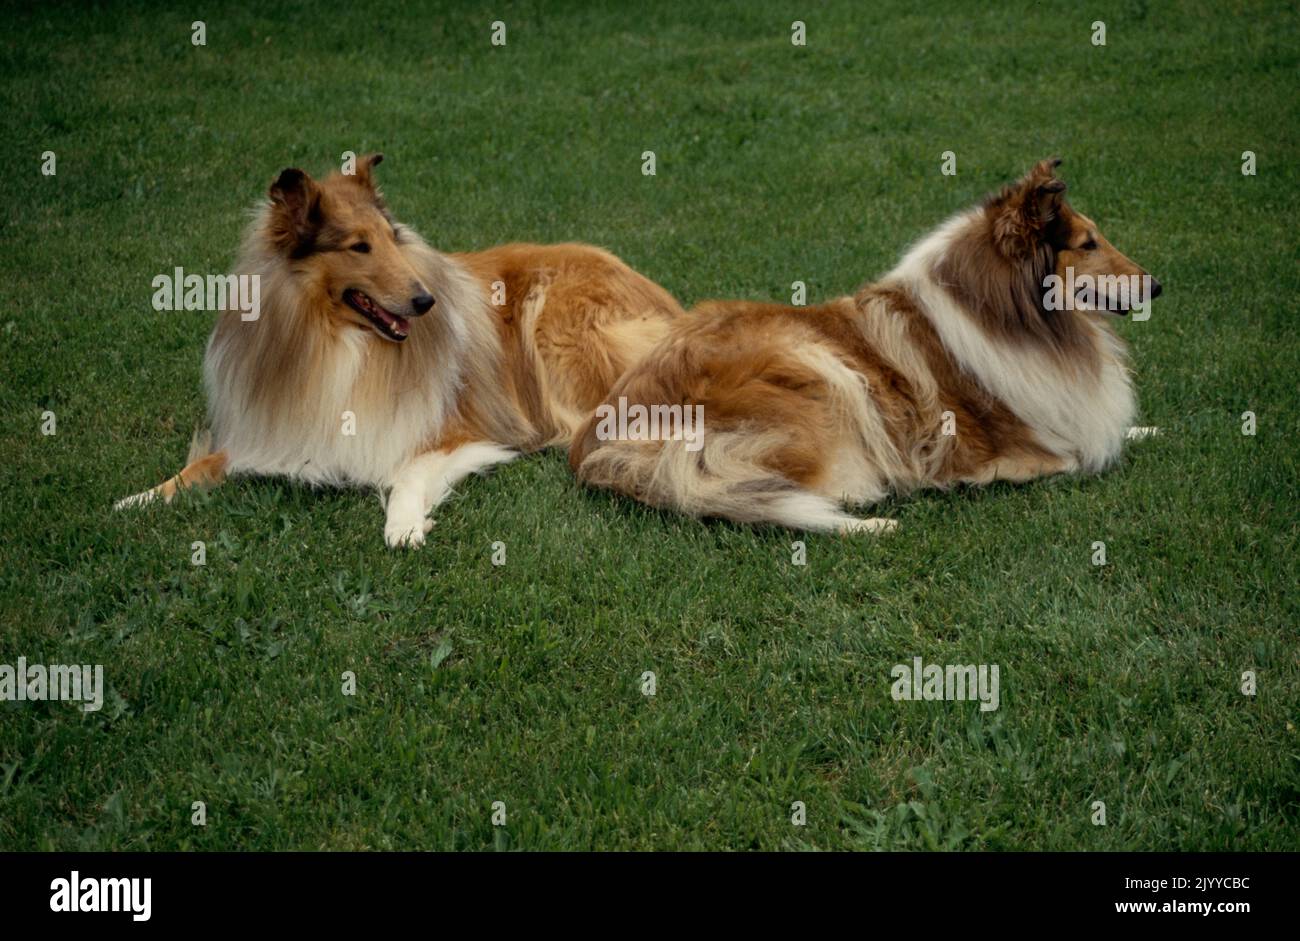 Collies in grass Stock Photo